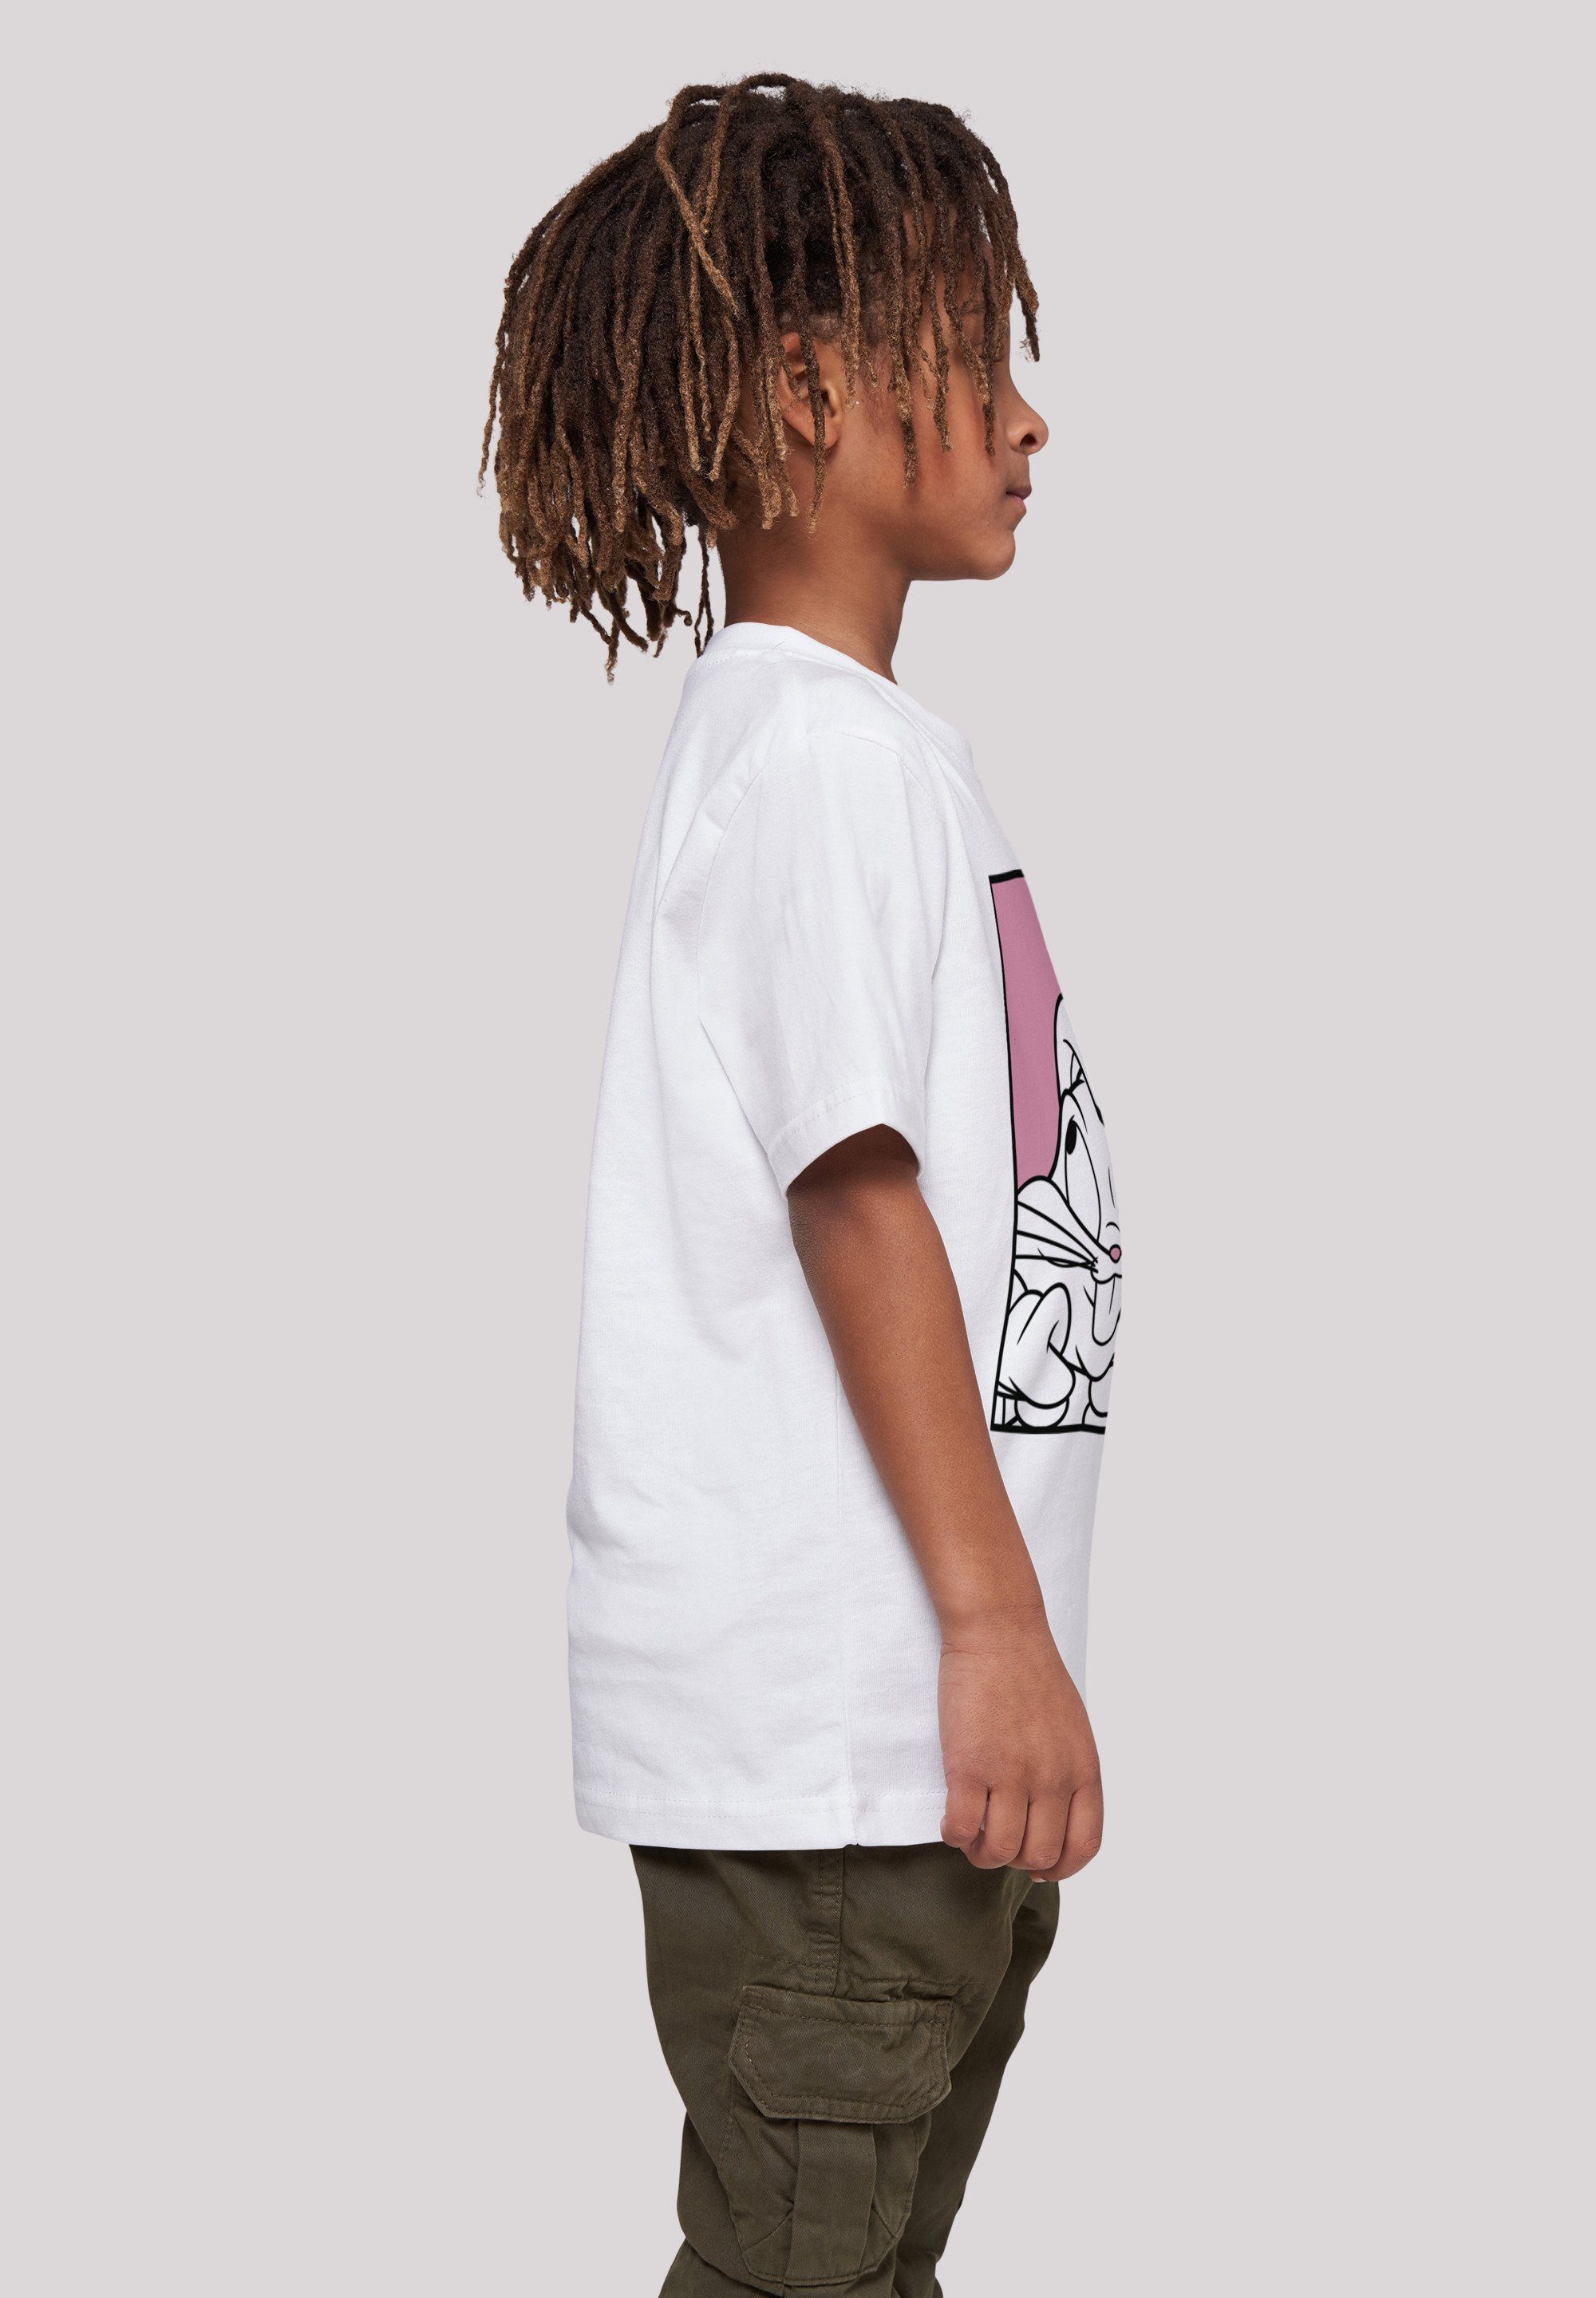 Tunes white (1-tlg) Kinder Bunny F4NT4STIC Bugs Adore-WHT Kids Basic Looney Kurzarmshirt with Tee